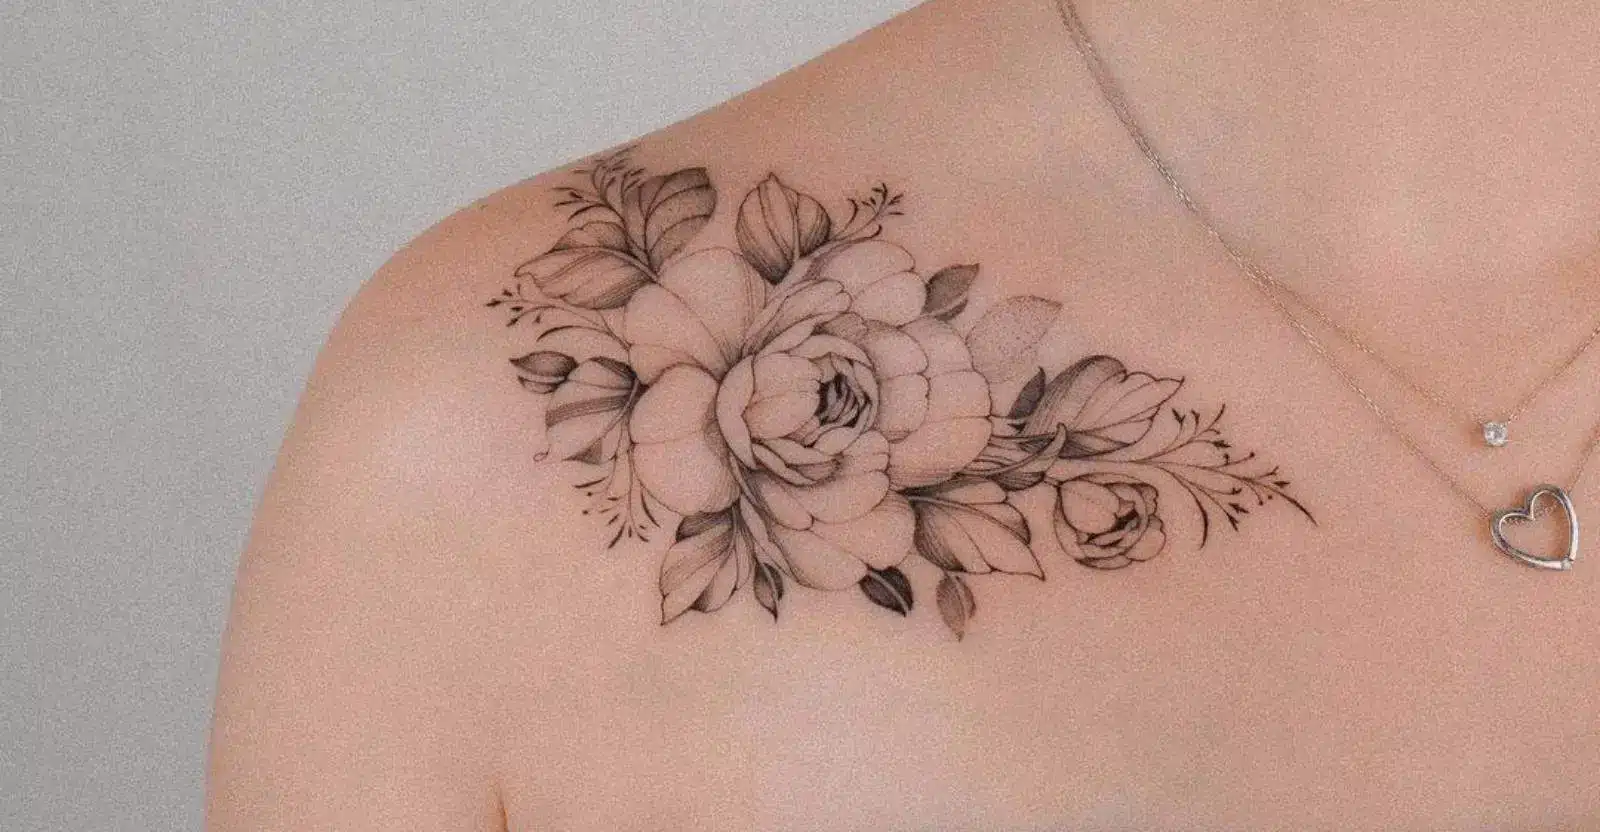  Flower tattoo meanings designs ideas and types of tattoos 